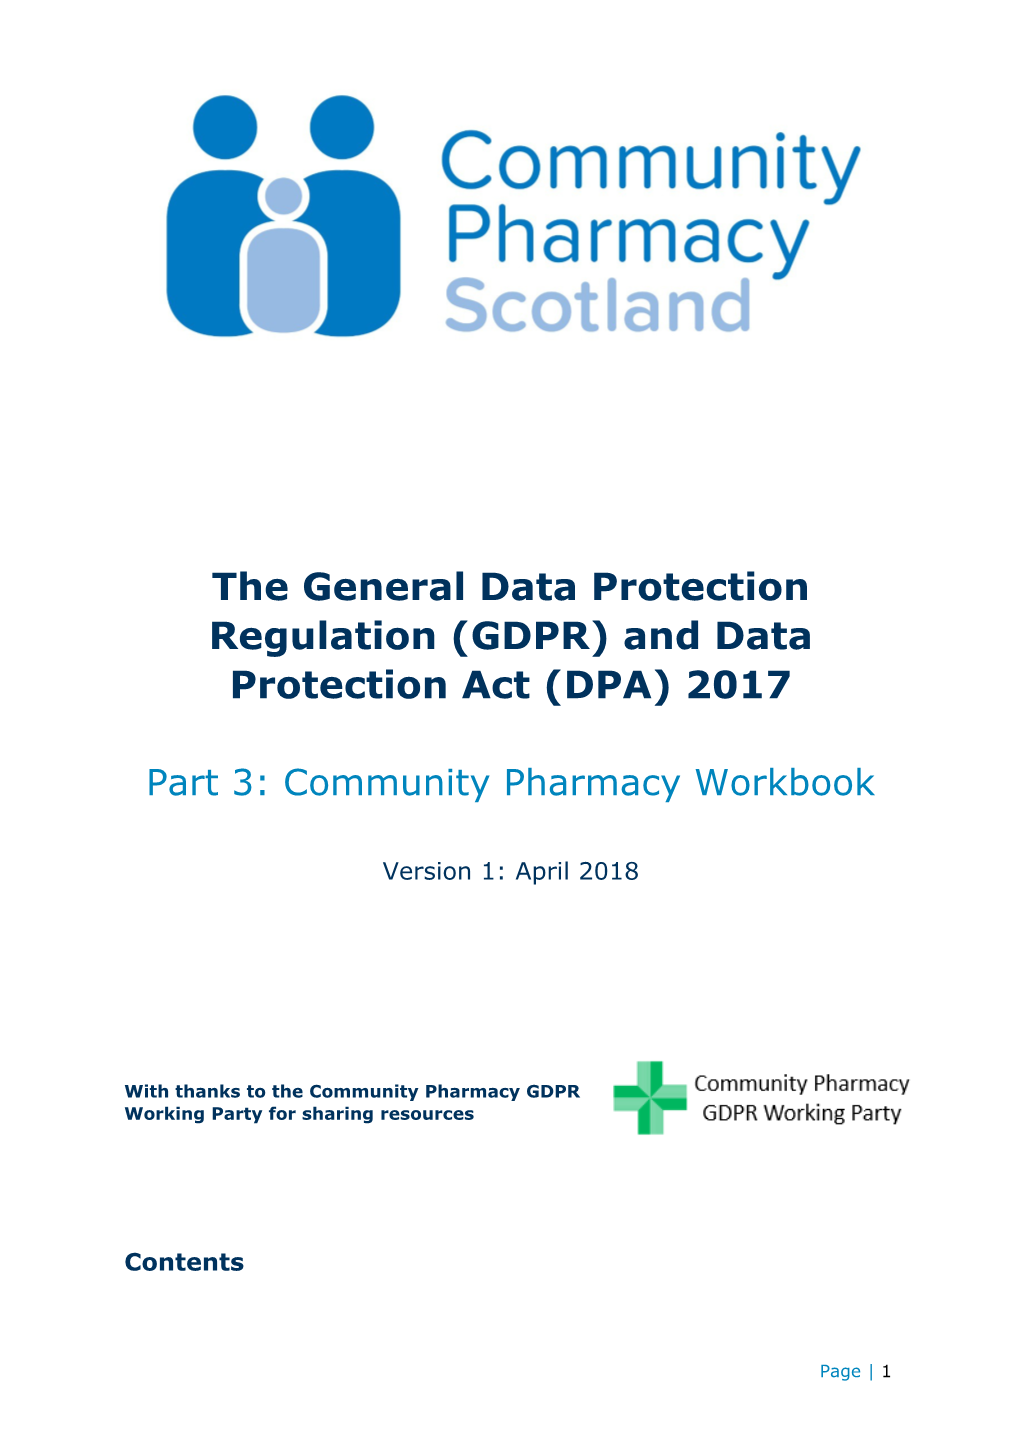 The General Data Protection Regulation (GDPR) and Data Protection Act (DPA) 2017